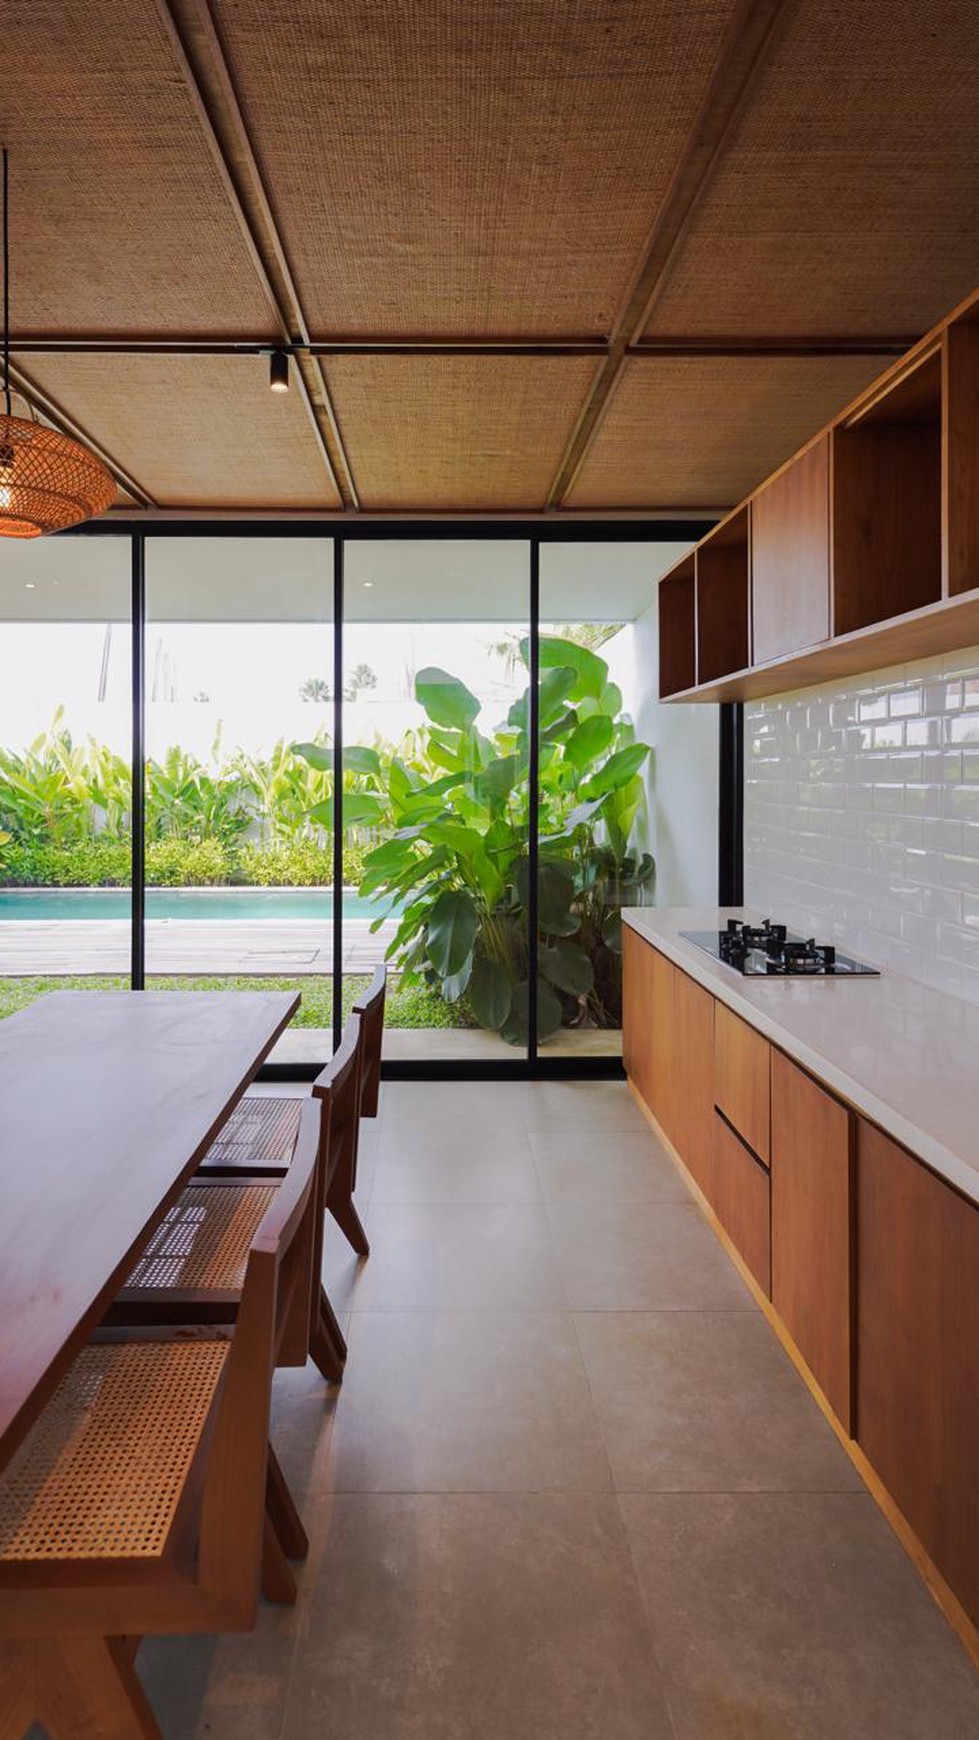 For Sale Leasehold - Brand new  modern villa  3 bedrooms in the heart of Berawa , Canggu 